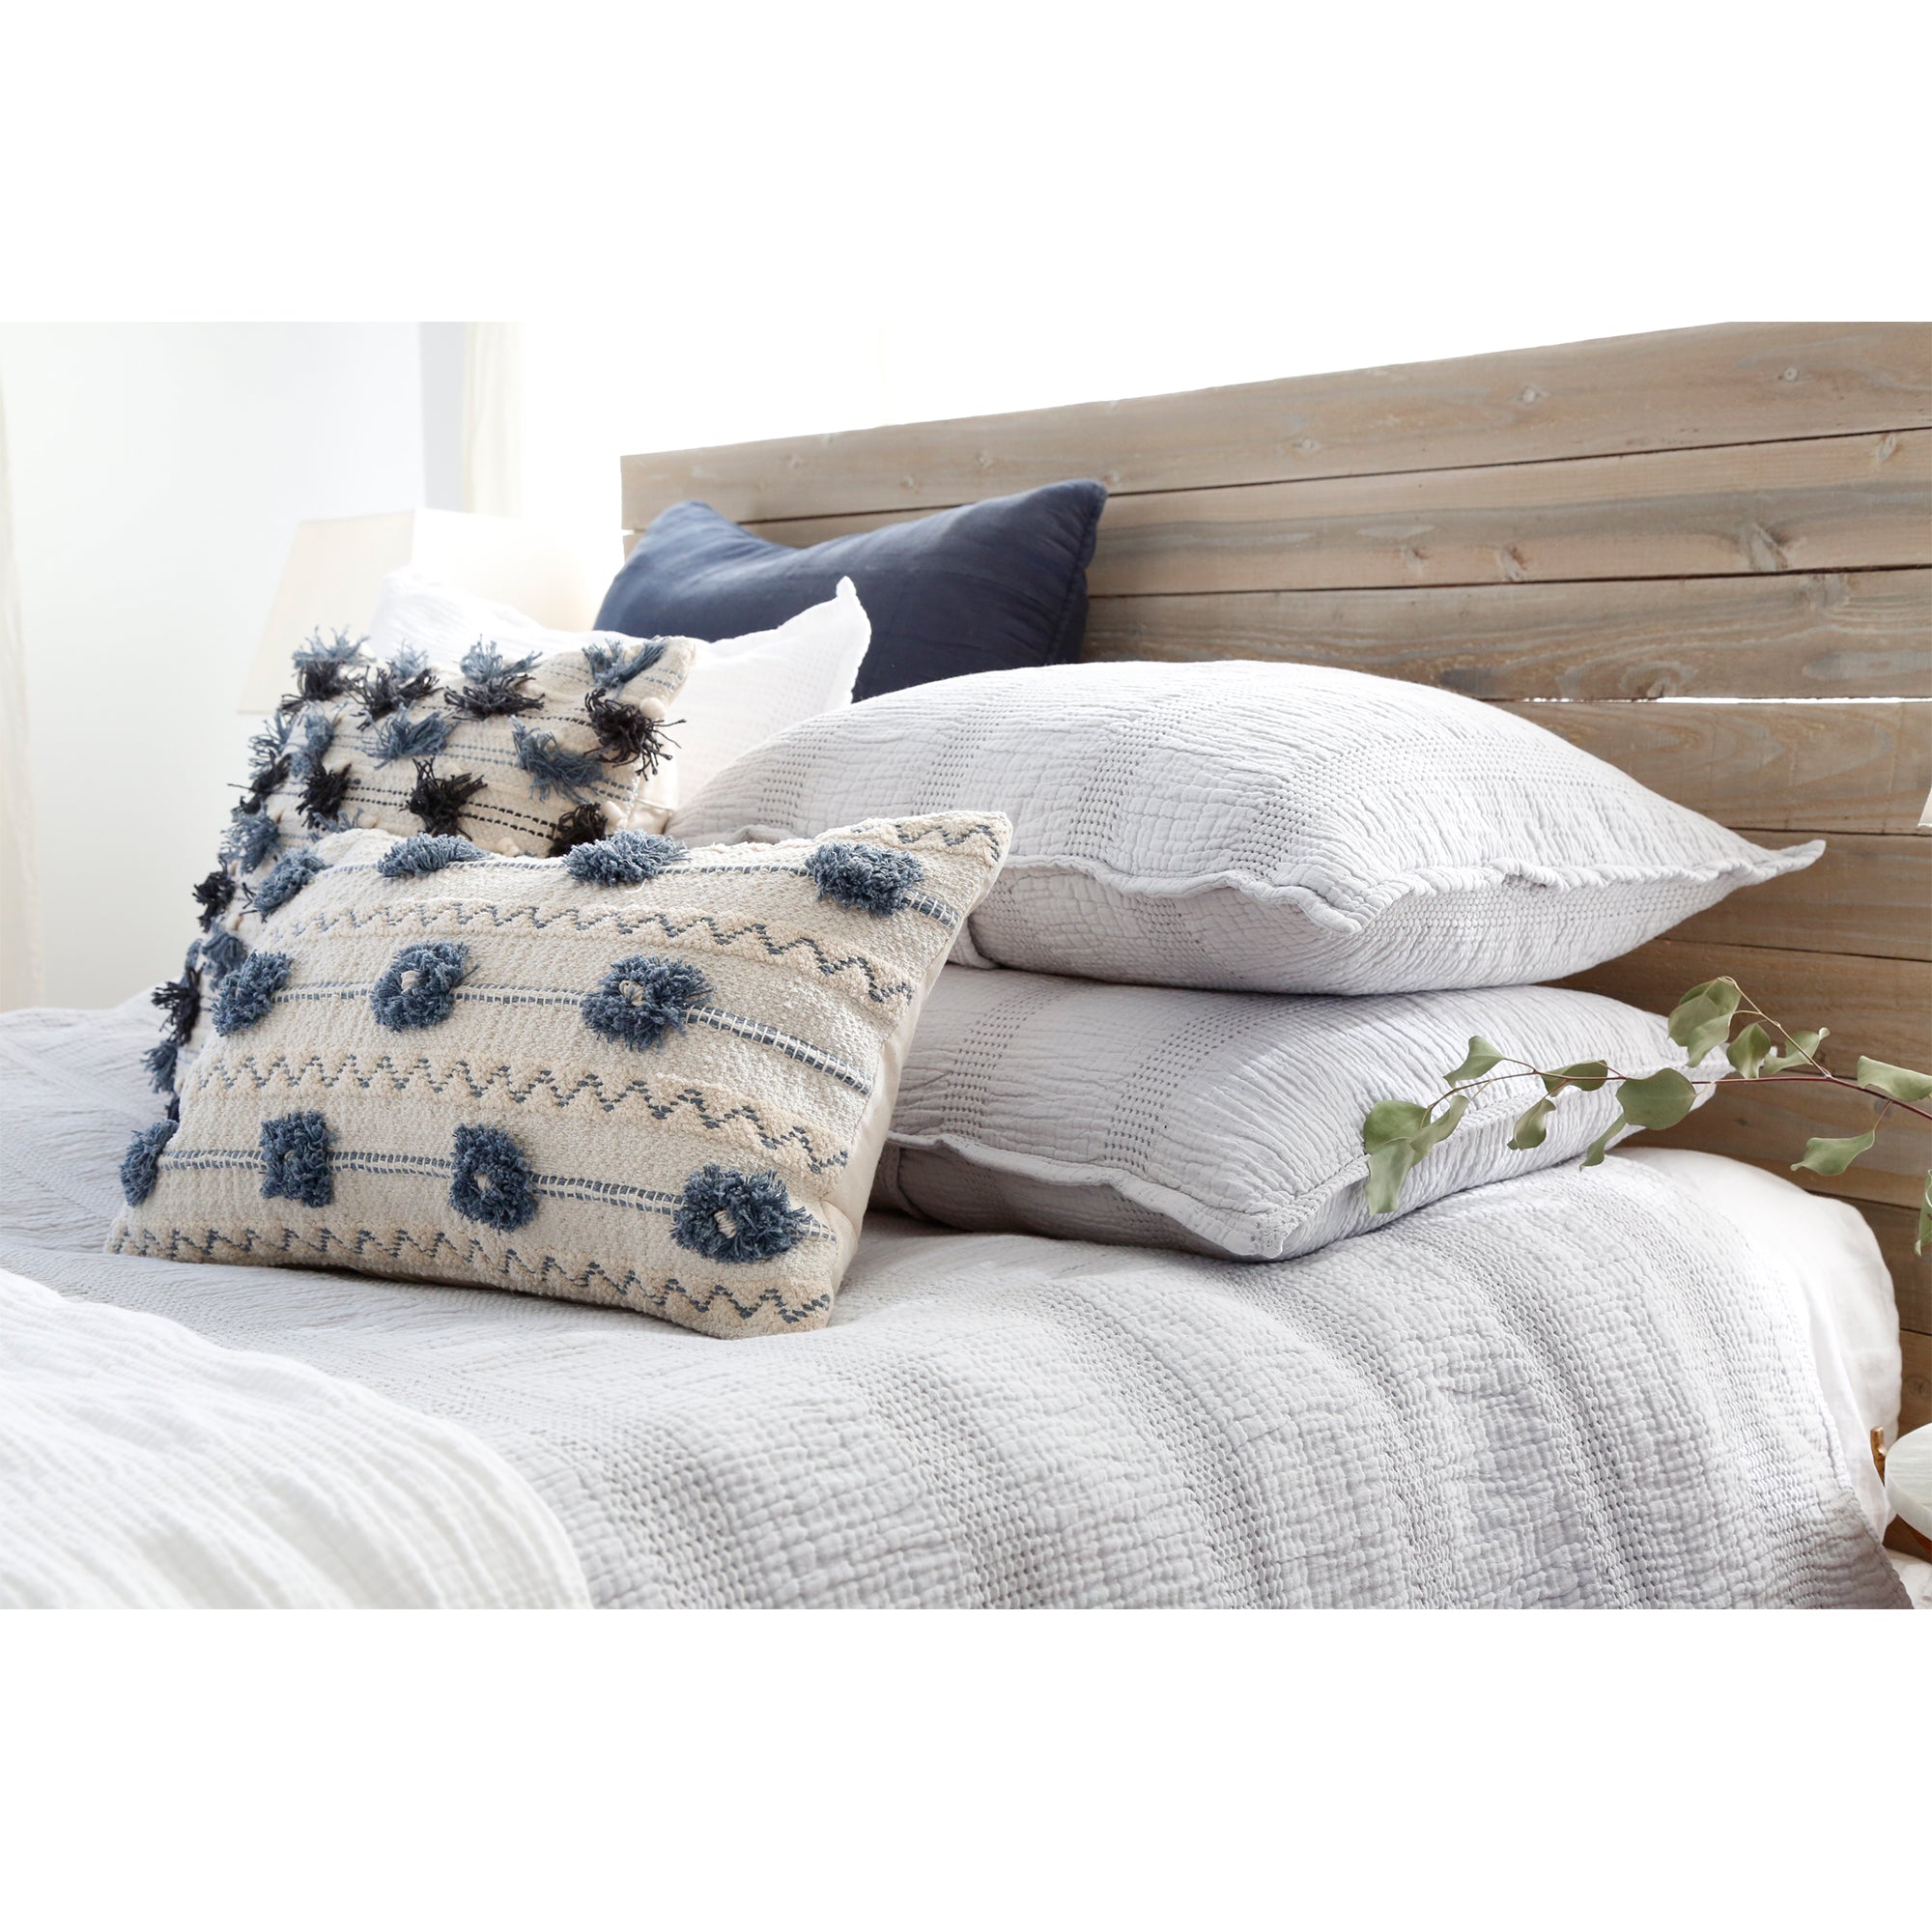 PIPPA HAND WOVEN PILLOW 20" x 20" with insert-Pom Pom at Home